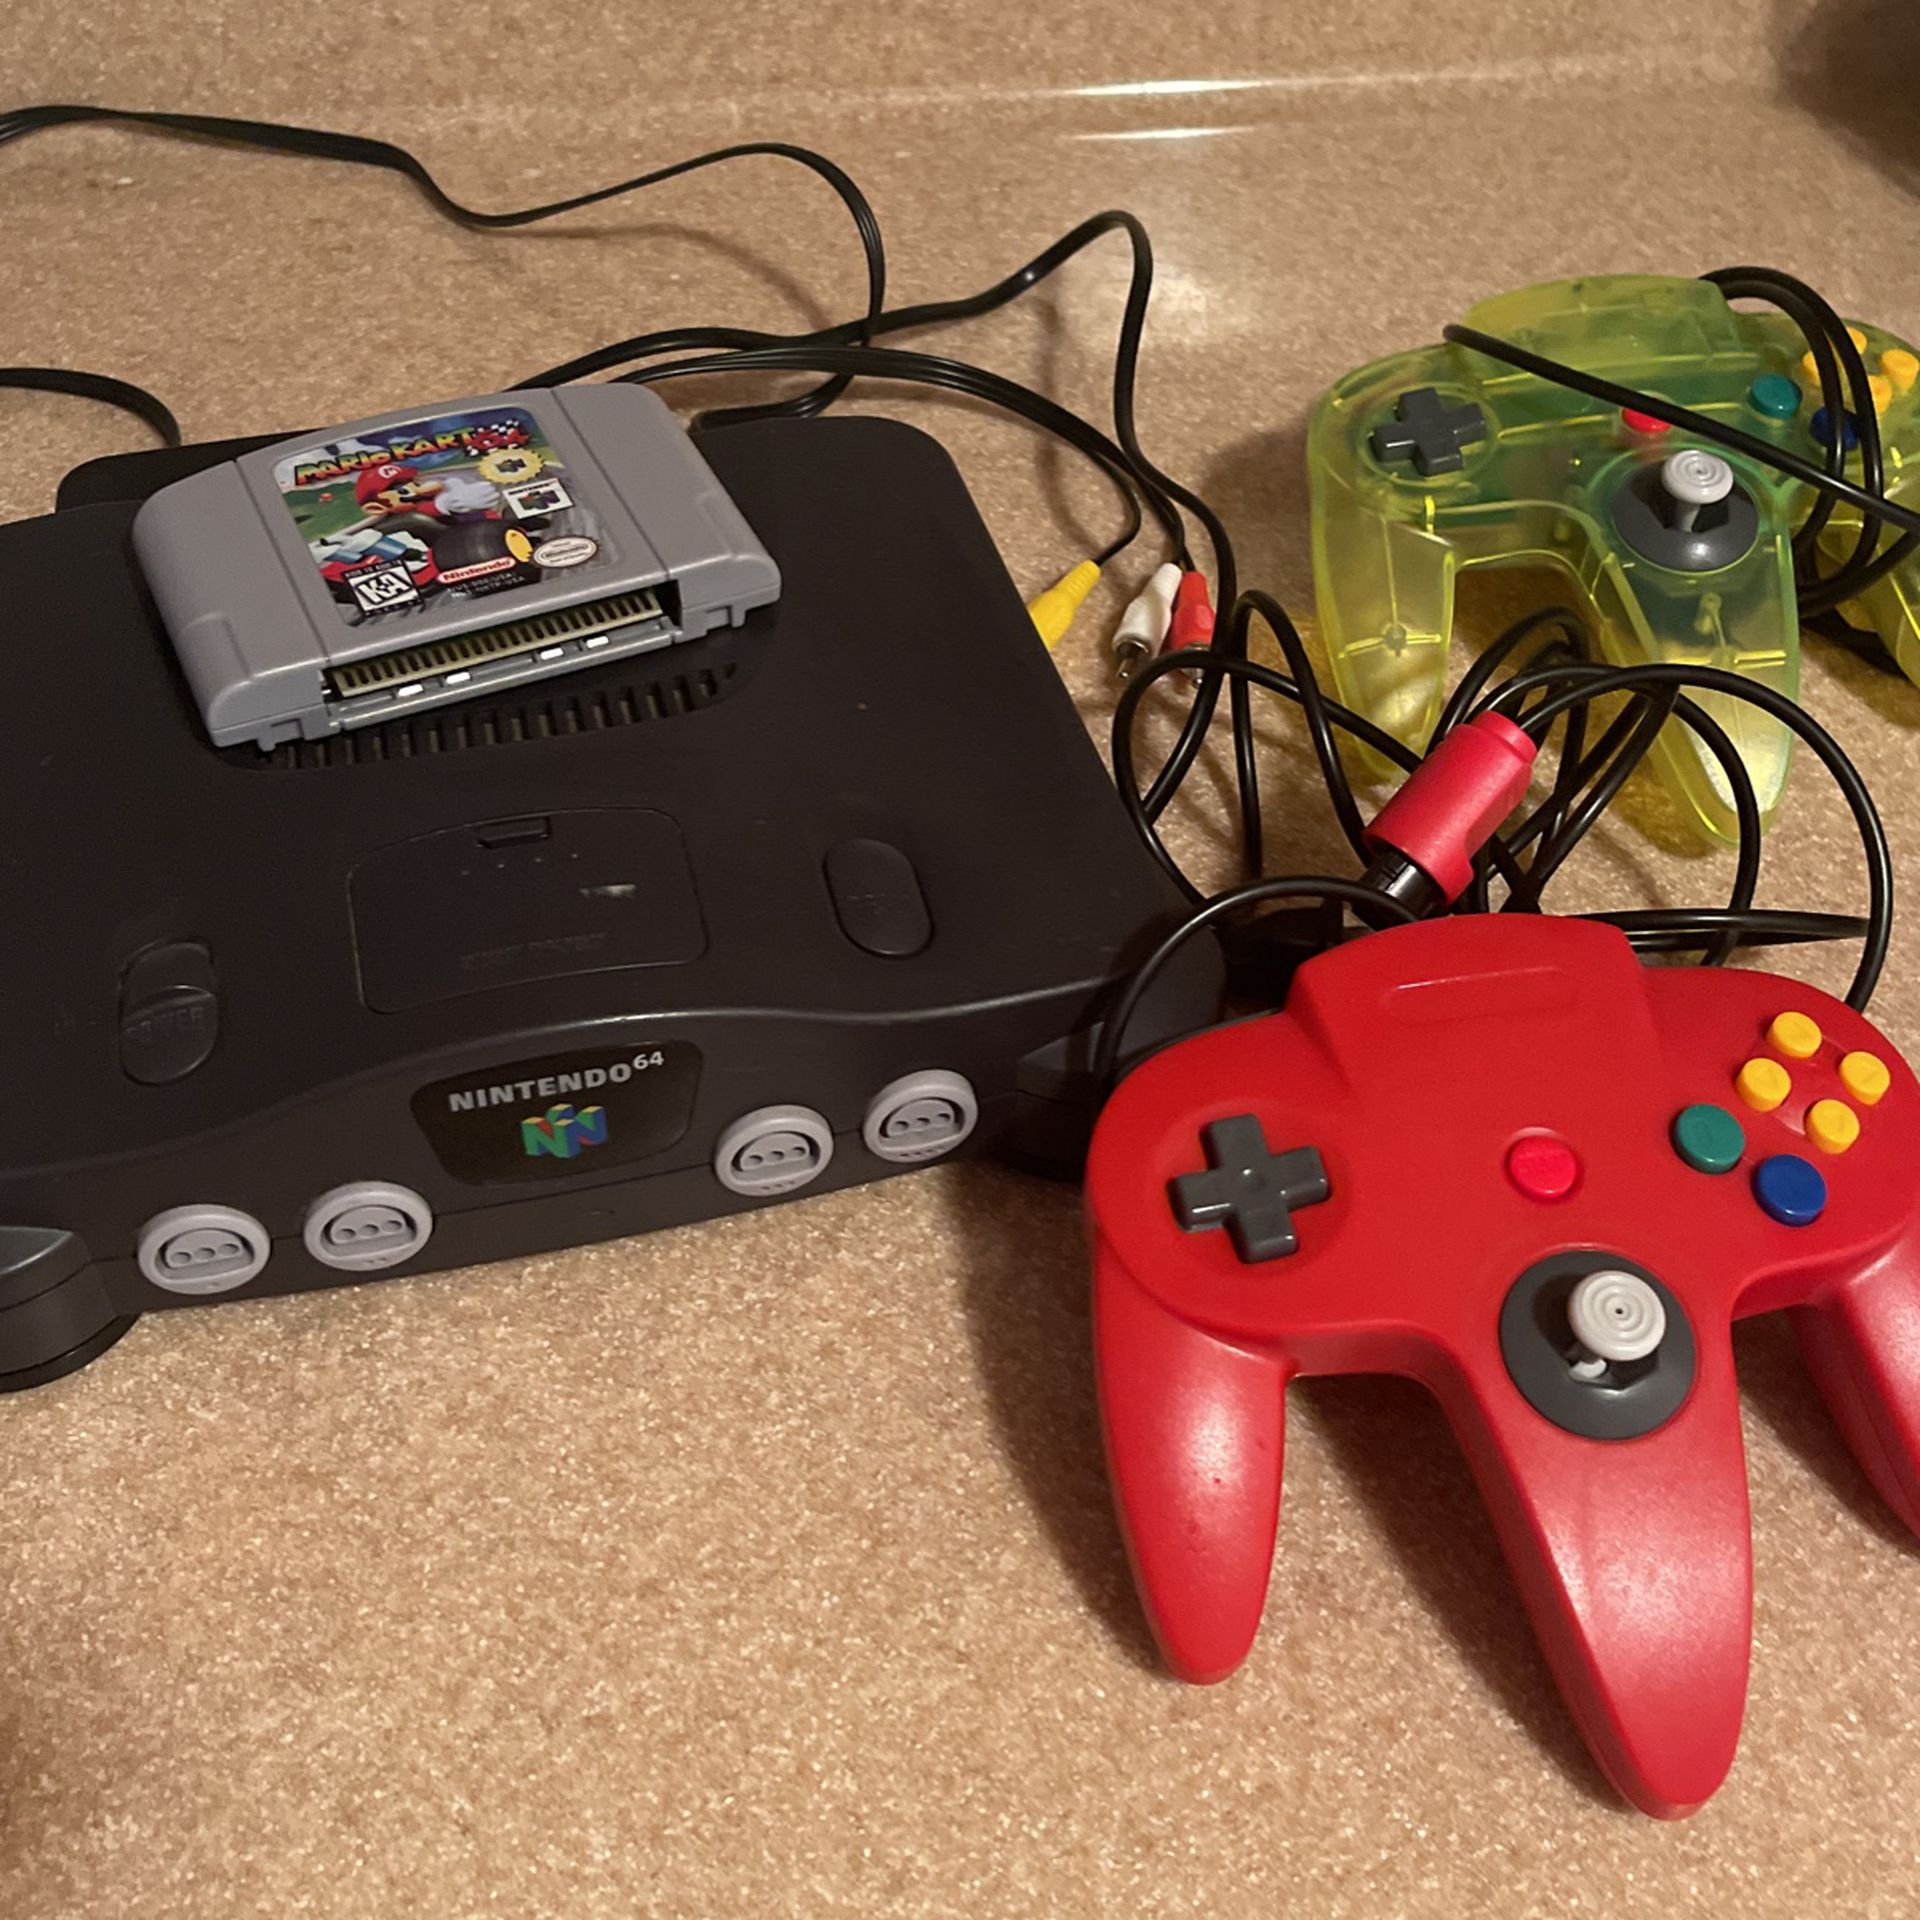 Nintendo Bundle Serious Buyers Only Please for Sale in Albuquerque, NM - OfferUp